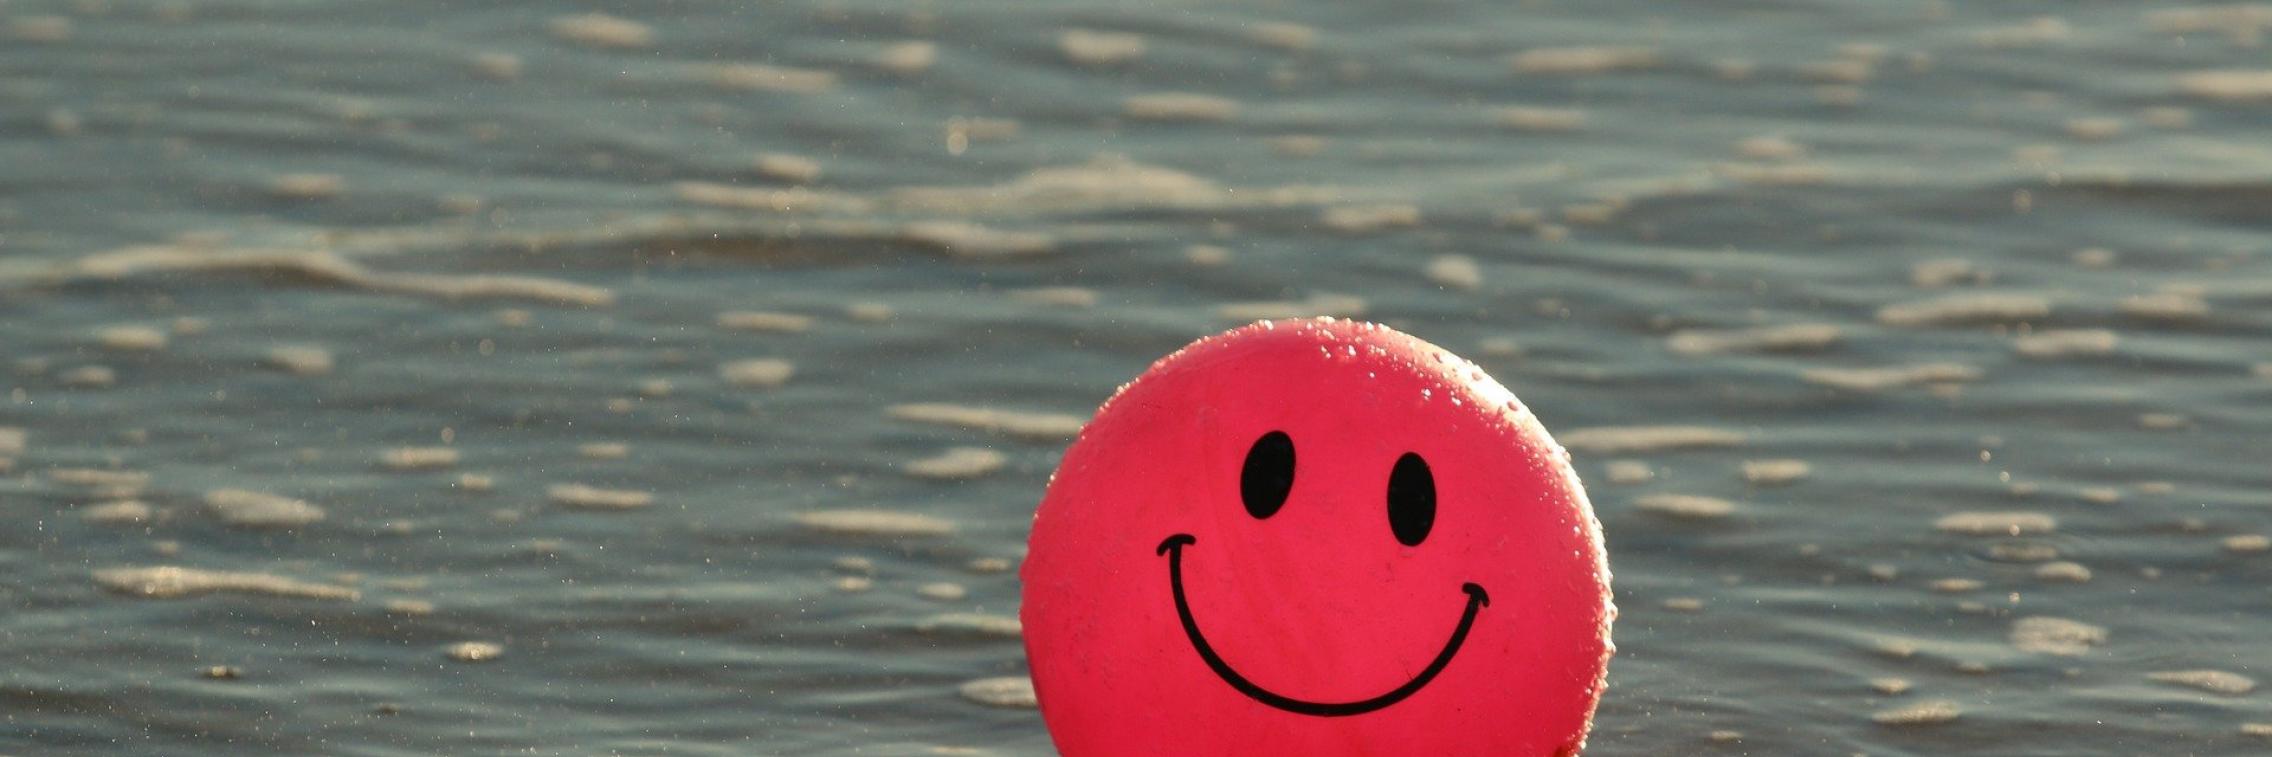 A ball with a smiley face on it floats optimistically in water.